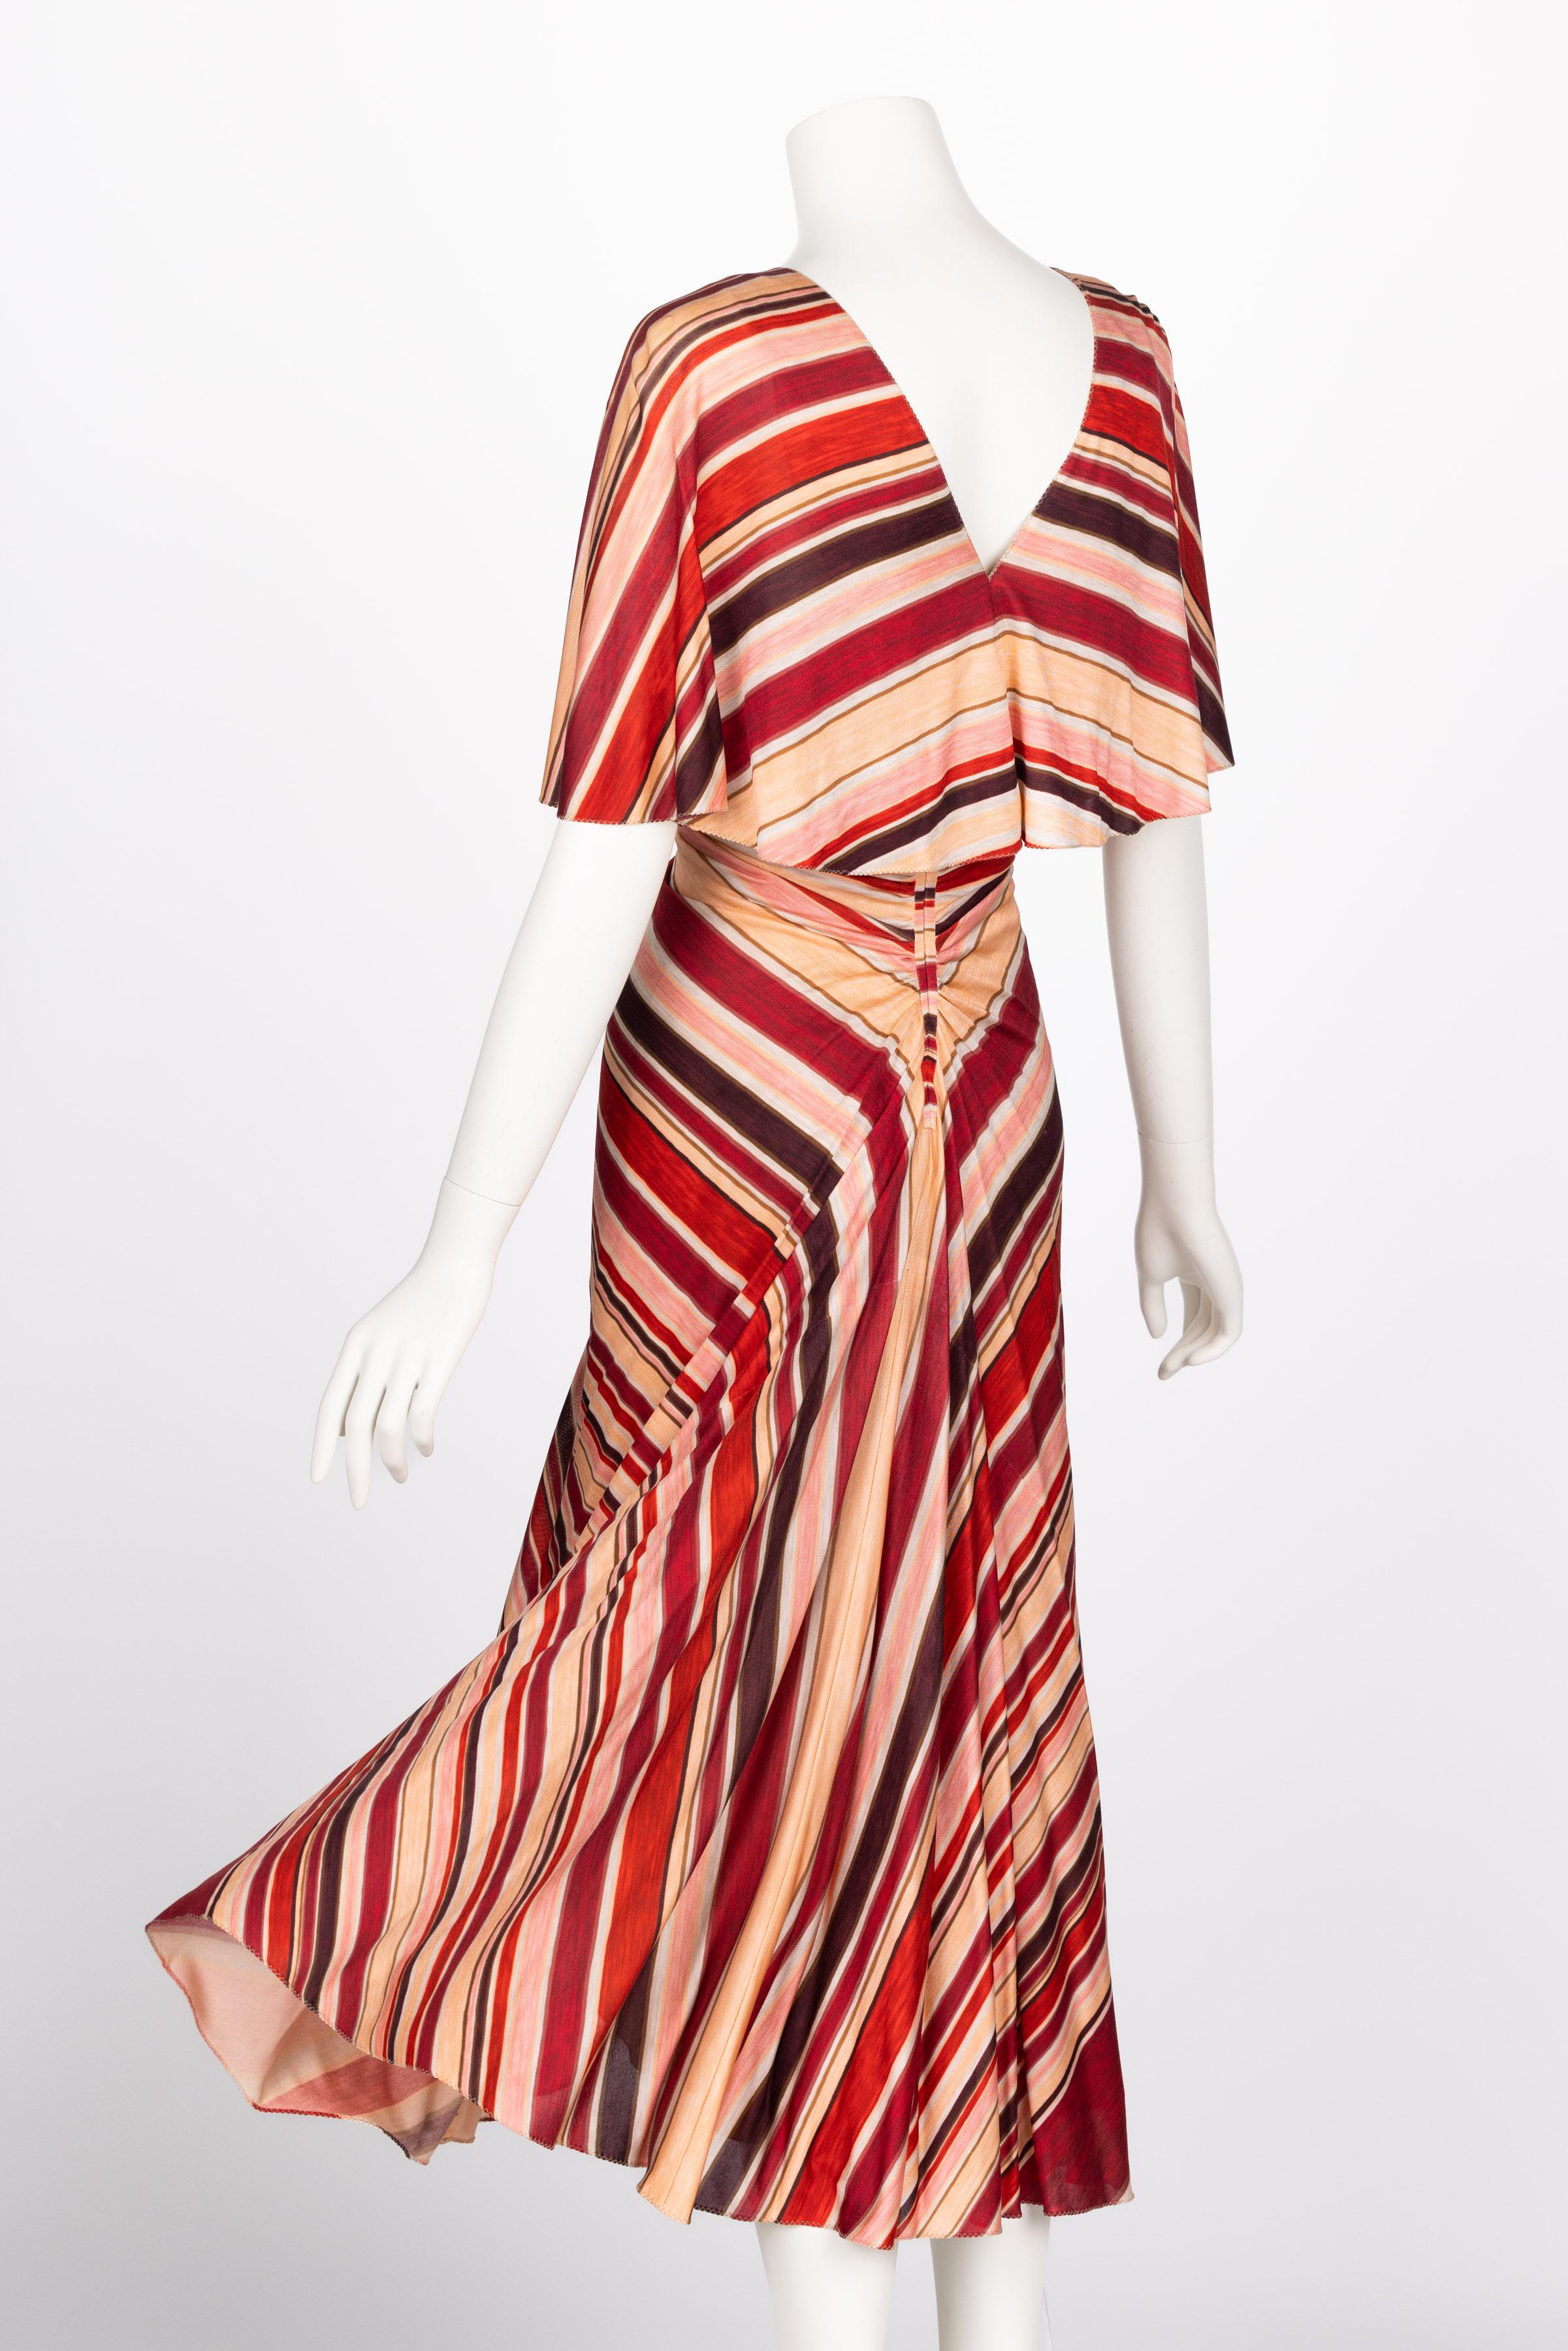 Marc Jacobs Spring 2011 Red & Pink Striped Silk Dress For Sale 1